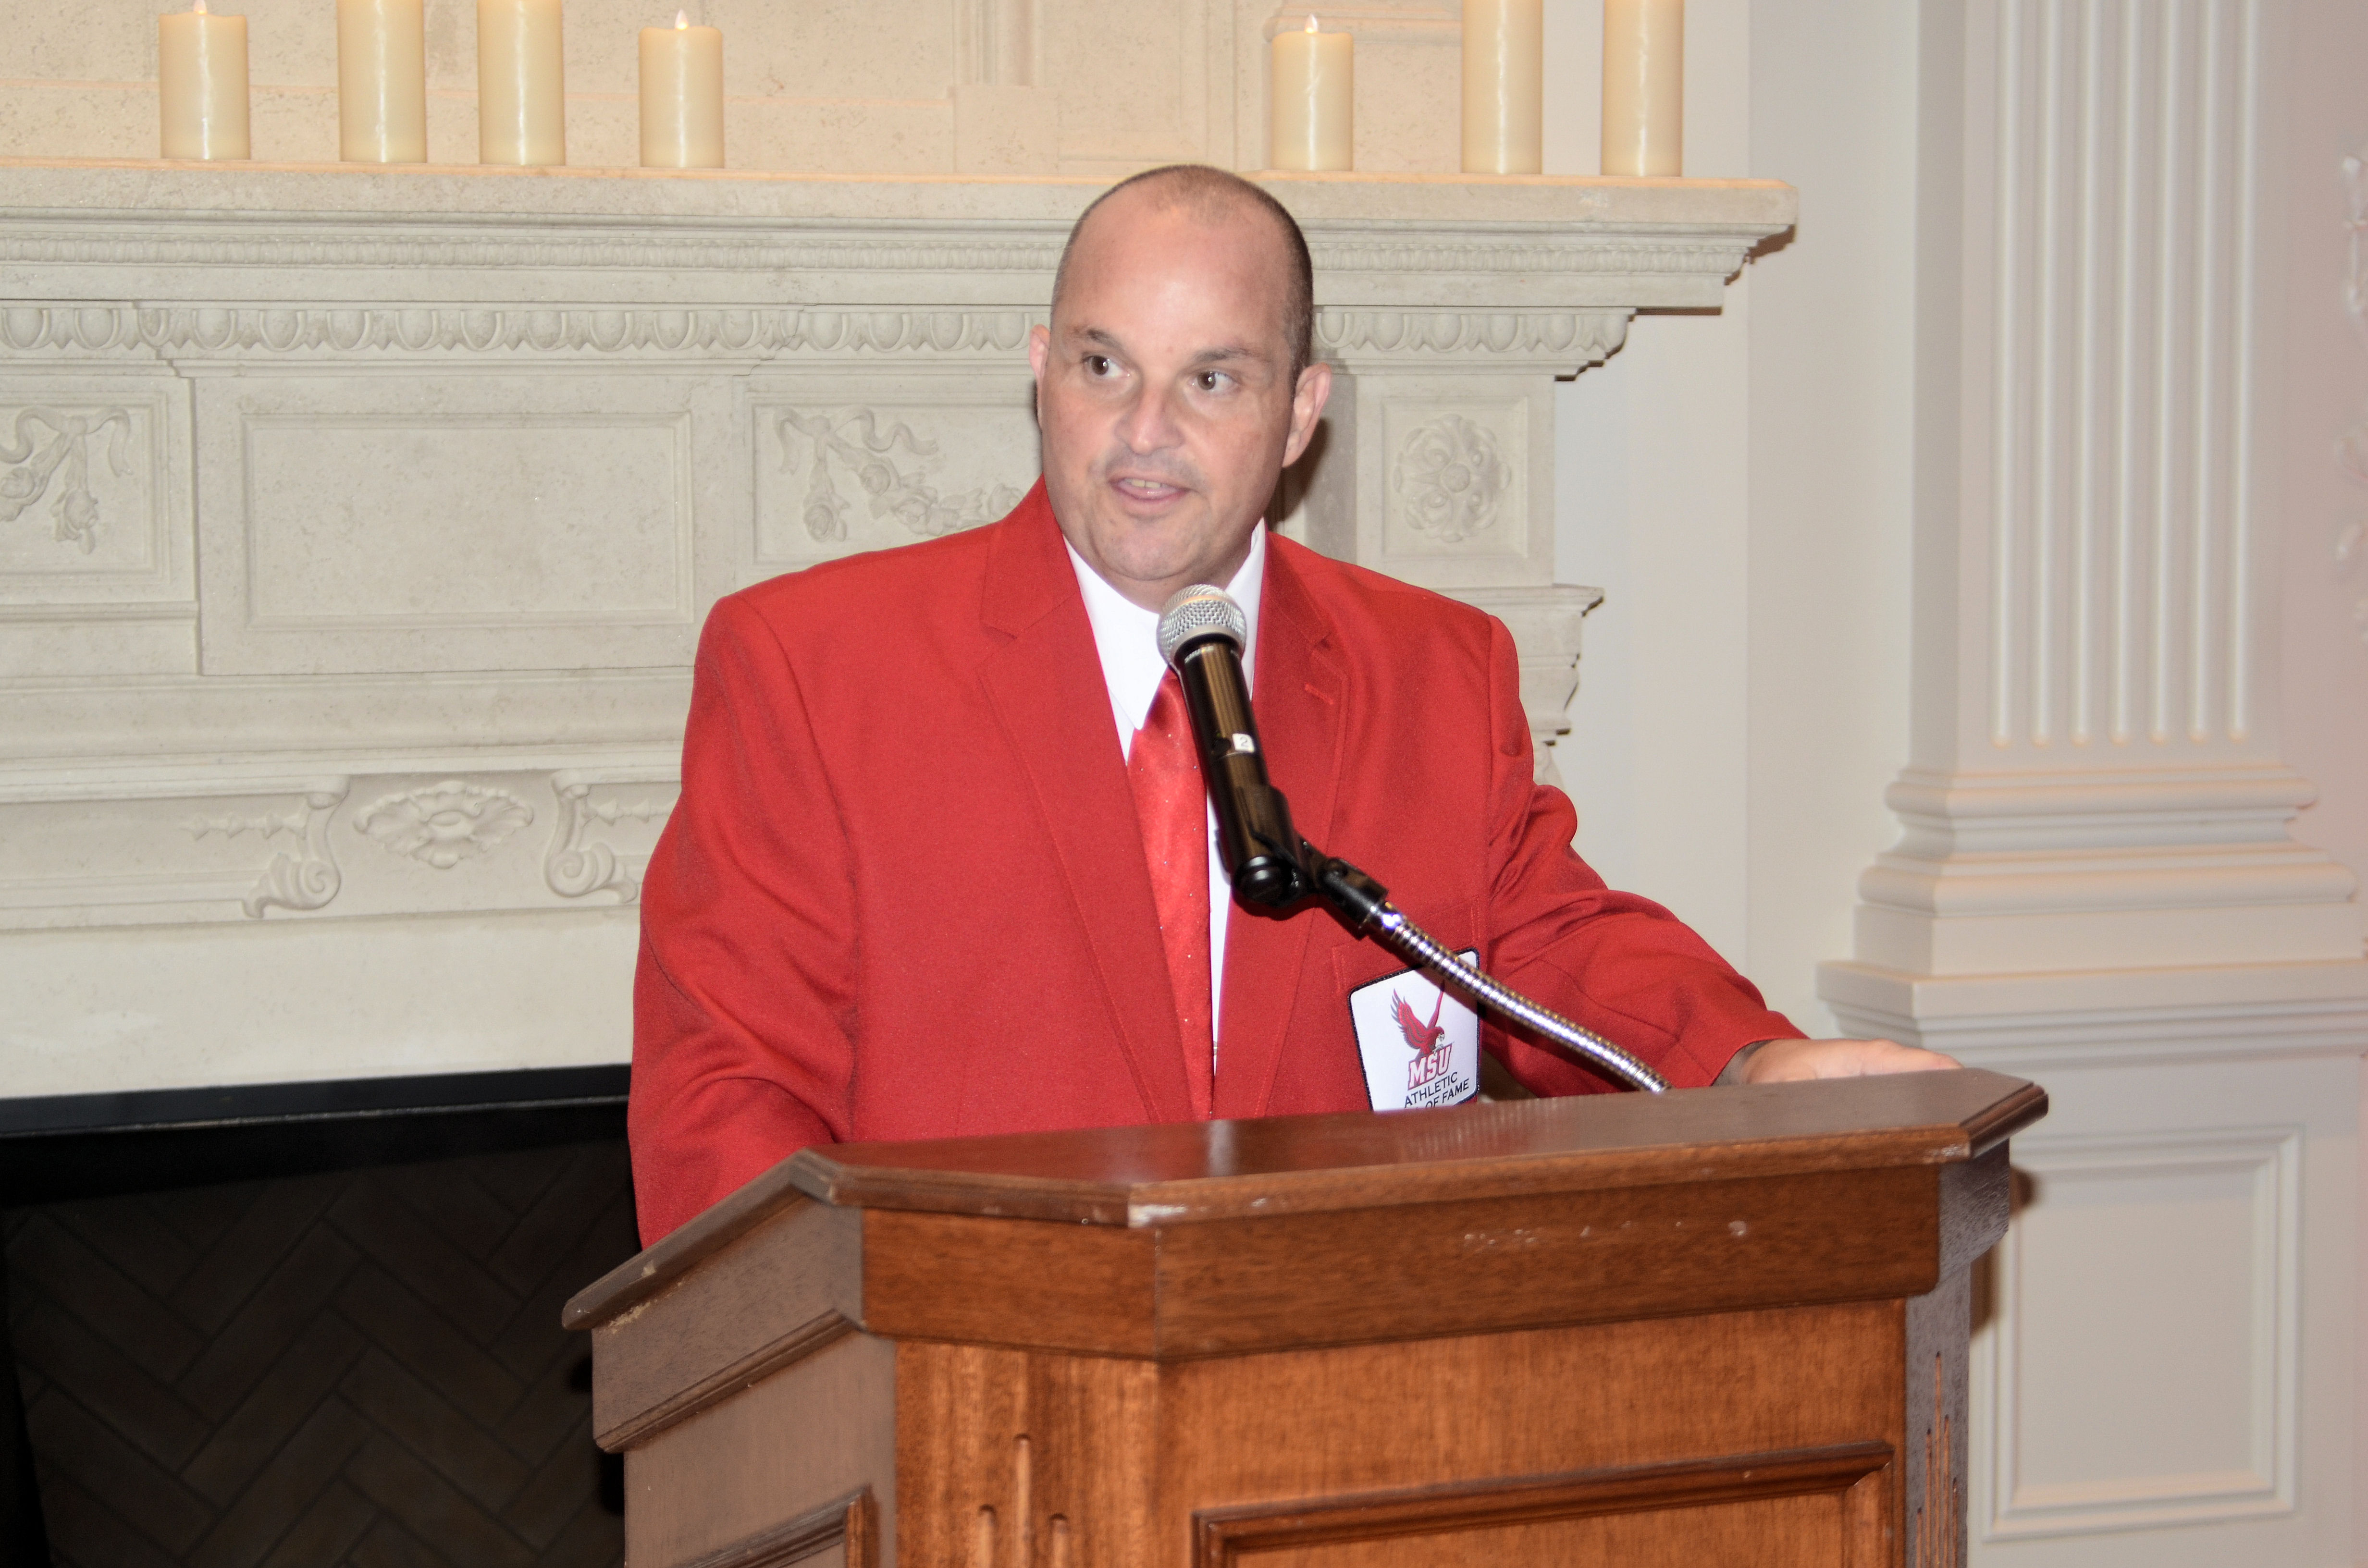 Scala speaks after winning the 25-year award from the College Sports Information Directors of America (COSIDA). Photo courtesy of Michael Scala